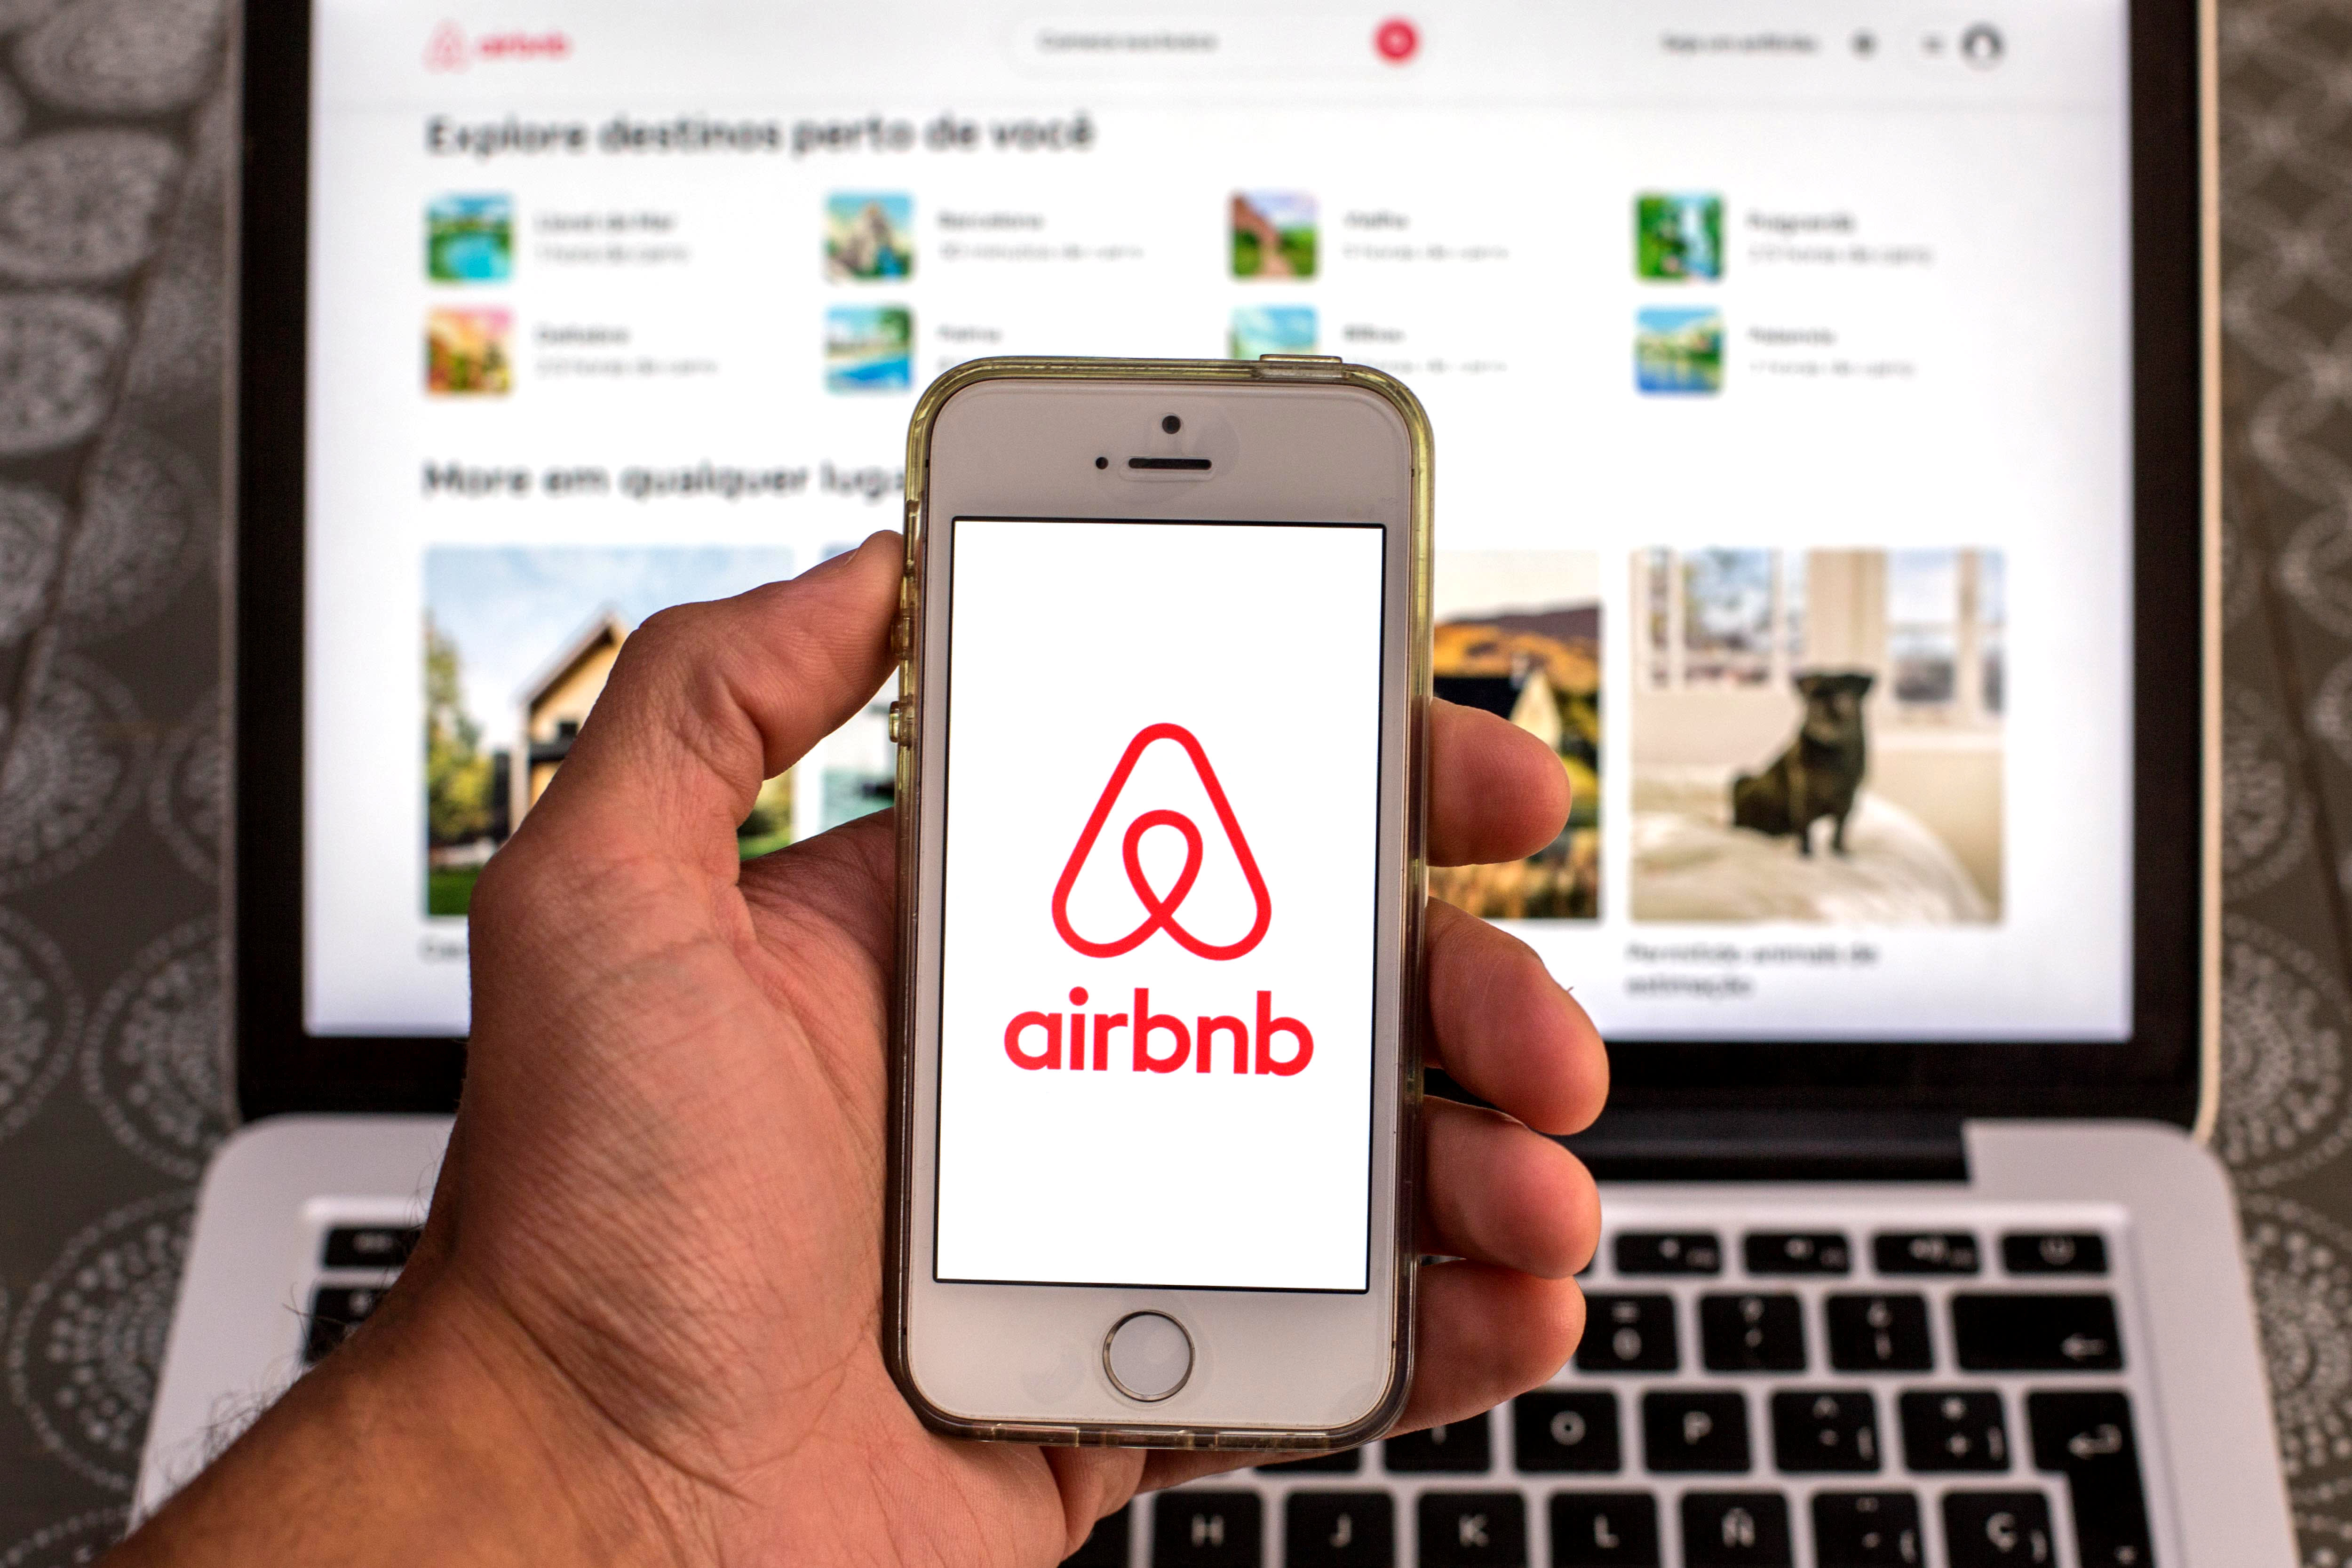 Airbnb is a bargain as it could soon become the largest Western travel company, says Bernstein